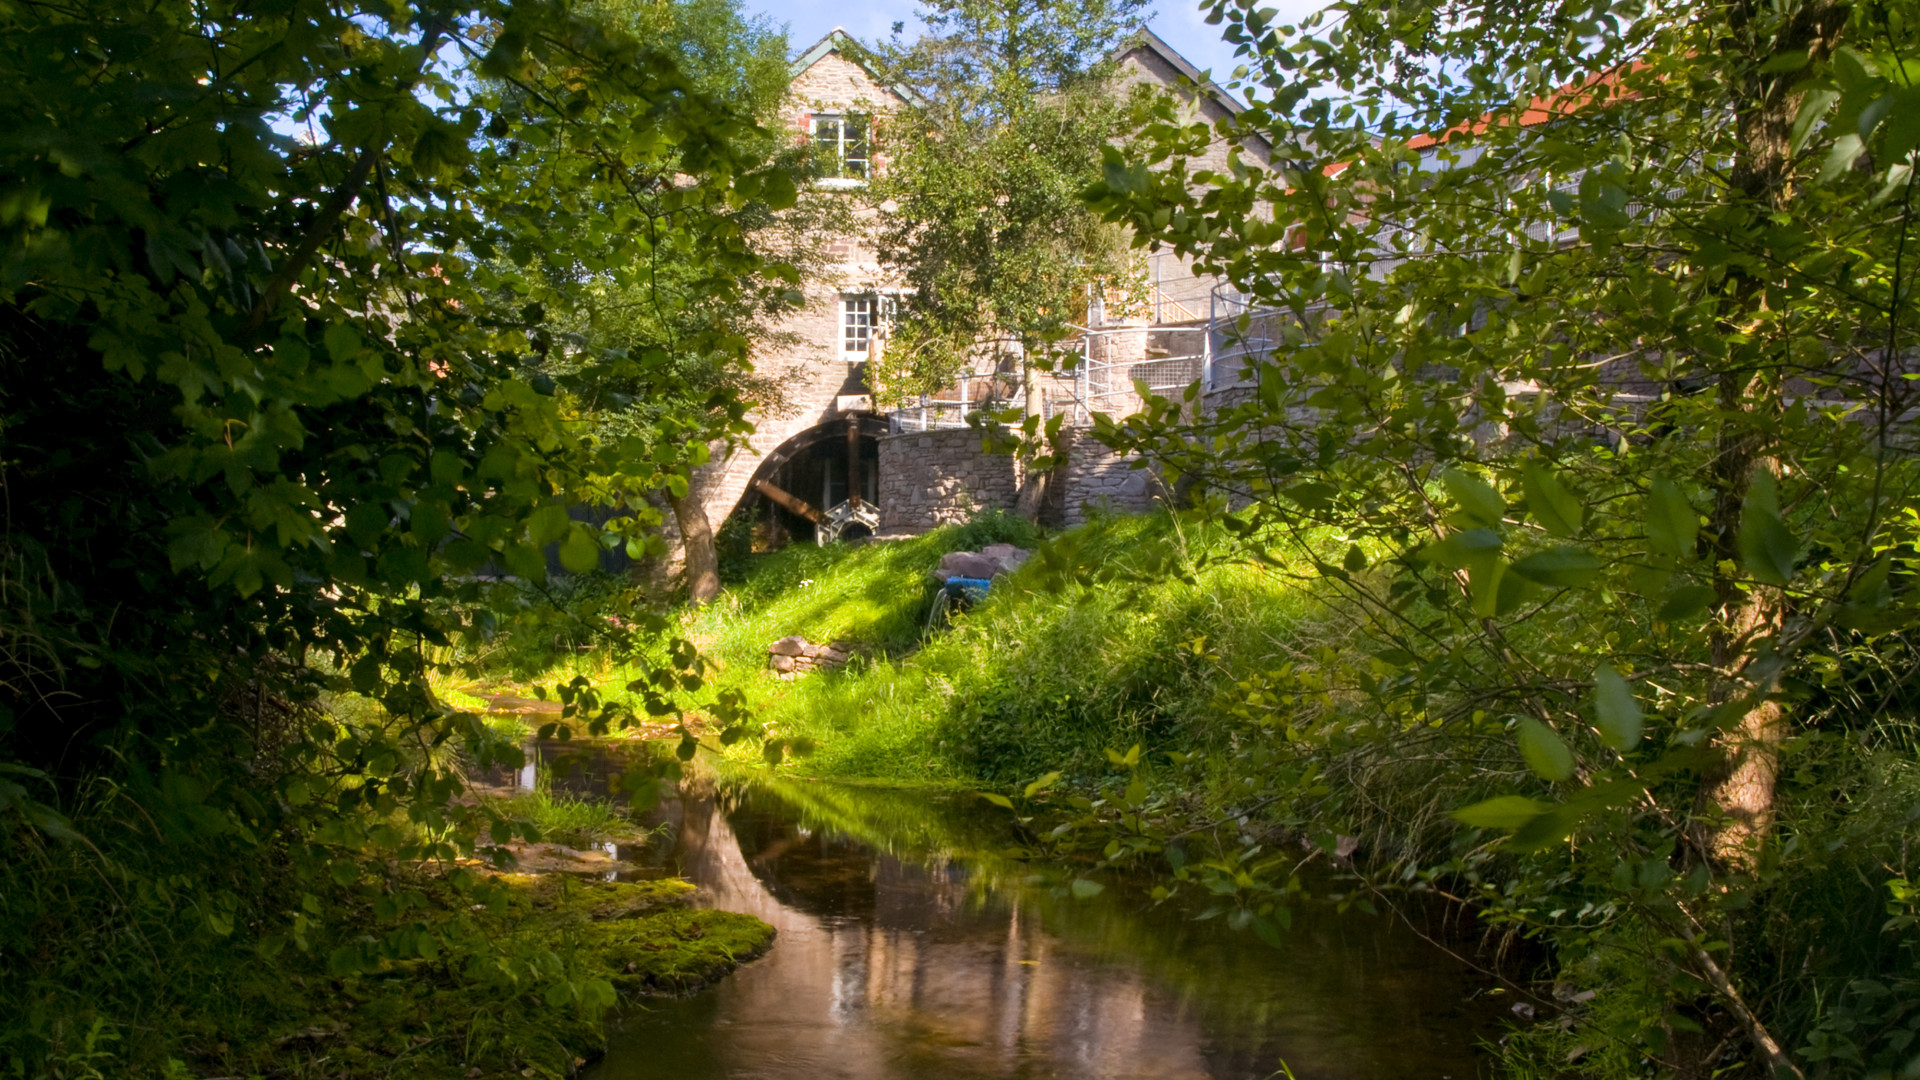 A beautiful view of Talgarth Mill. Surrounded by green tree's and grass banks, with a small river running through the centre.